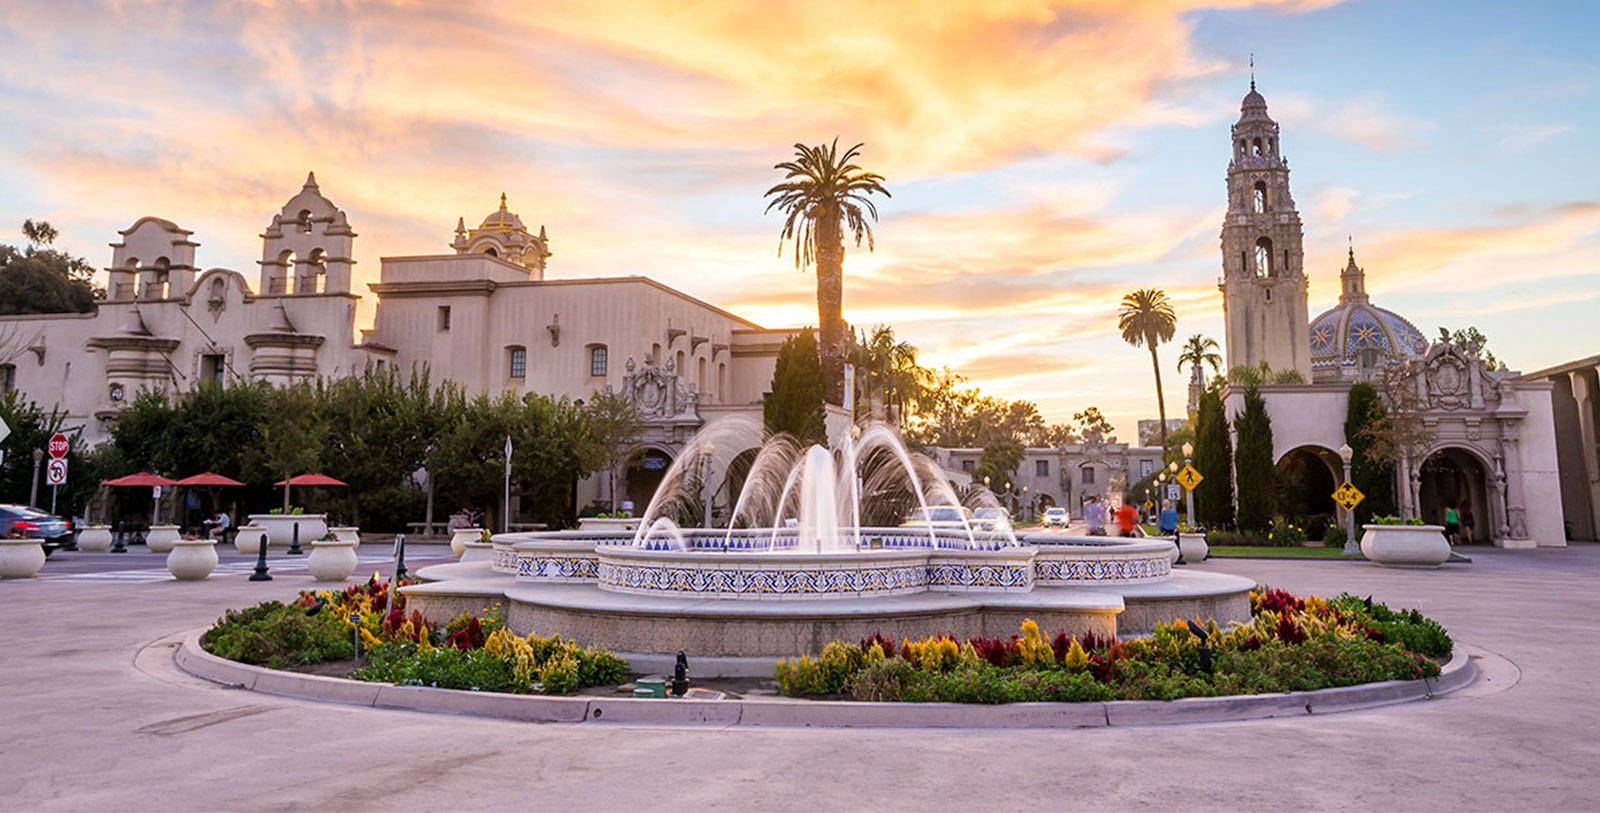 Experience the USS Midway Museum, Seaport Village, Balboa Park, and the Gaslamp Quarter nearby. Explore the San Diego Zoo Safari Park.